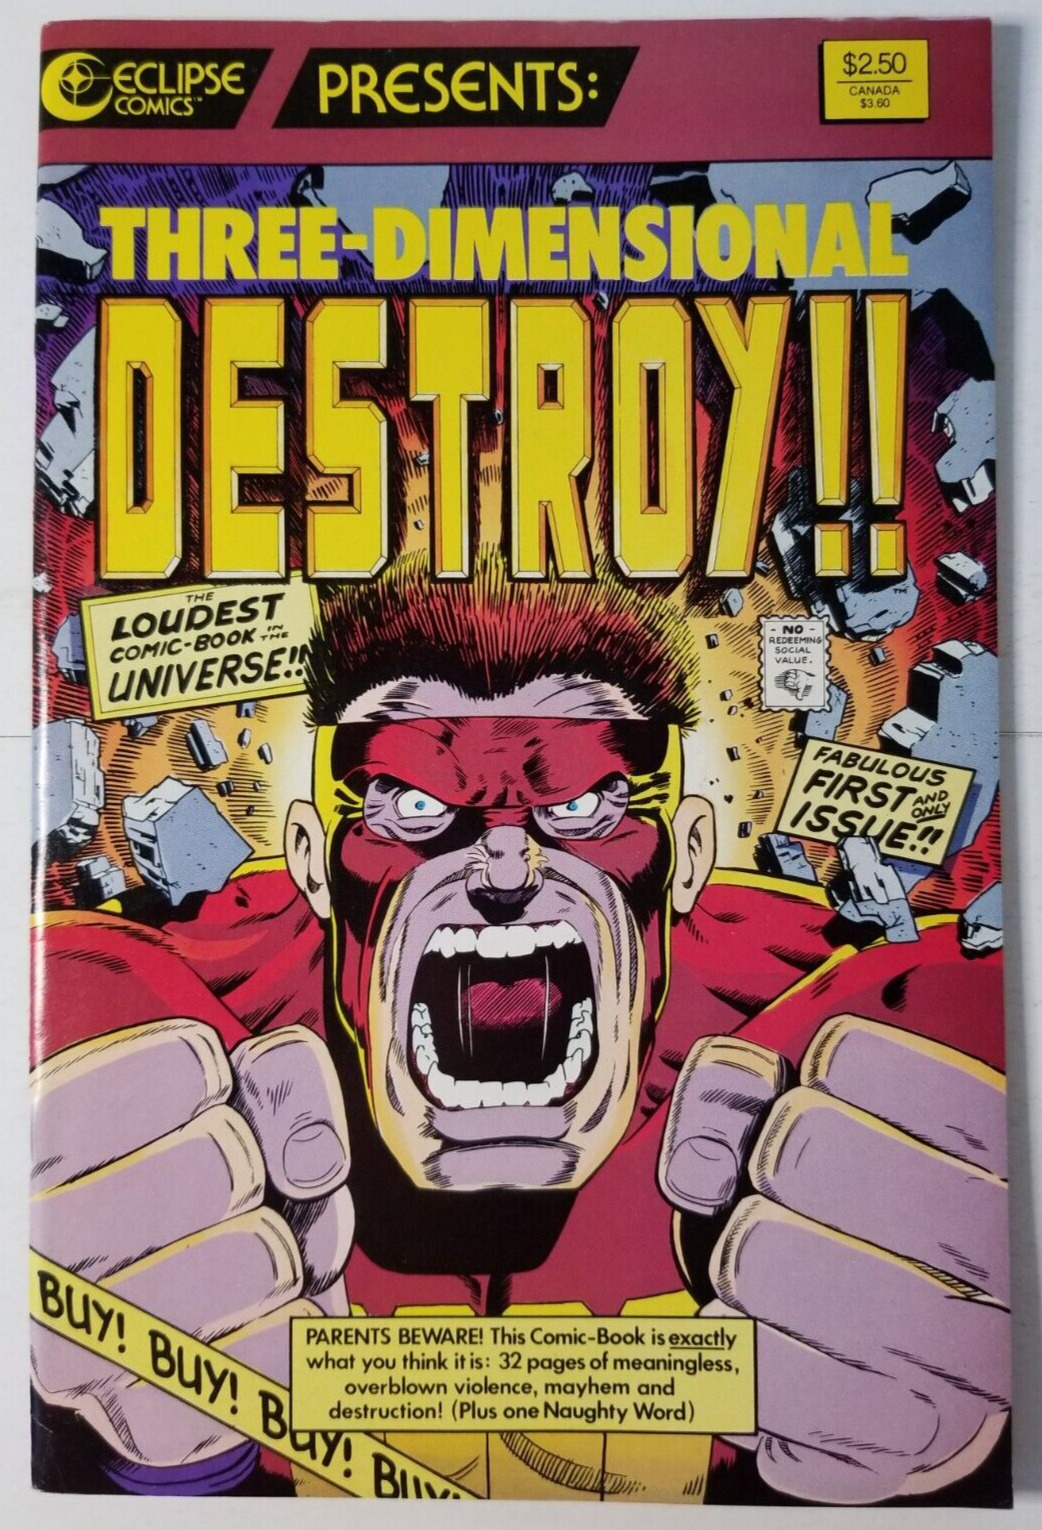 Three Dimensional Destroy #1 VF/NM (1987, Eclipse) 3D glasses still attached